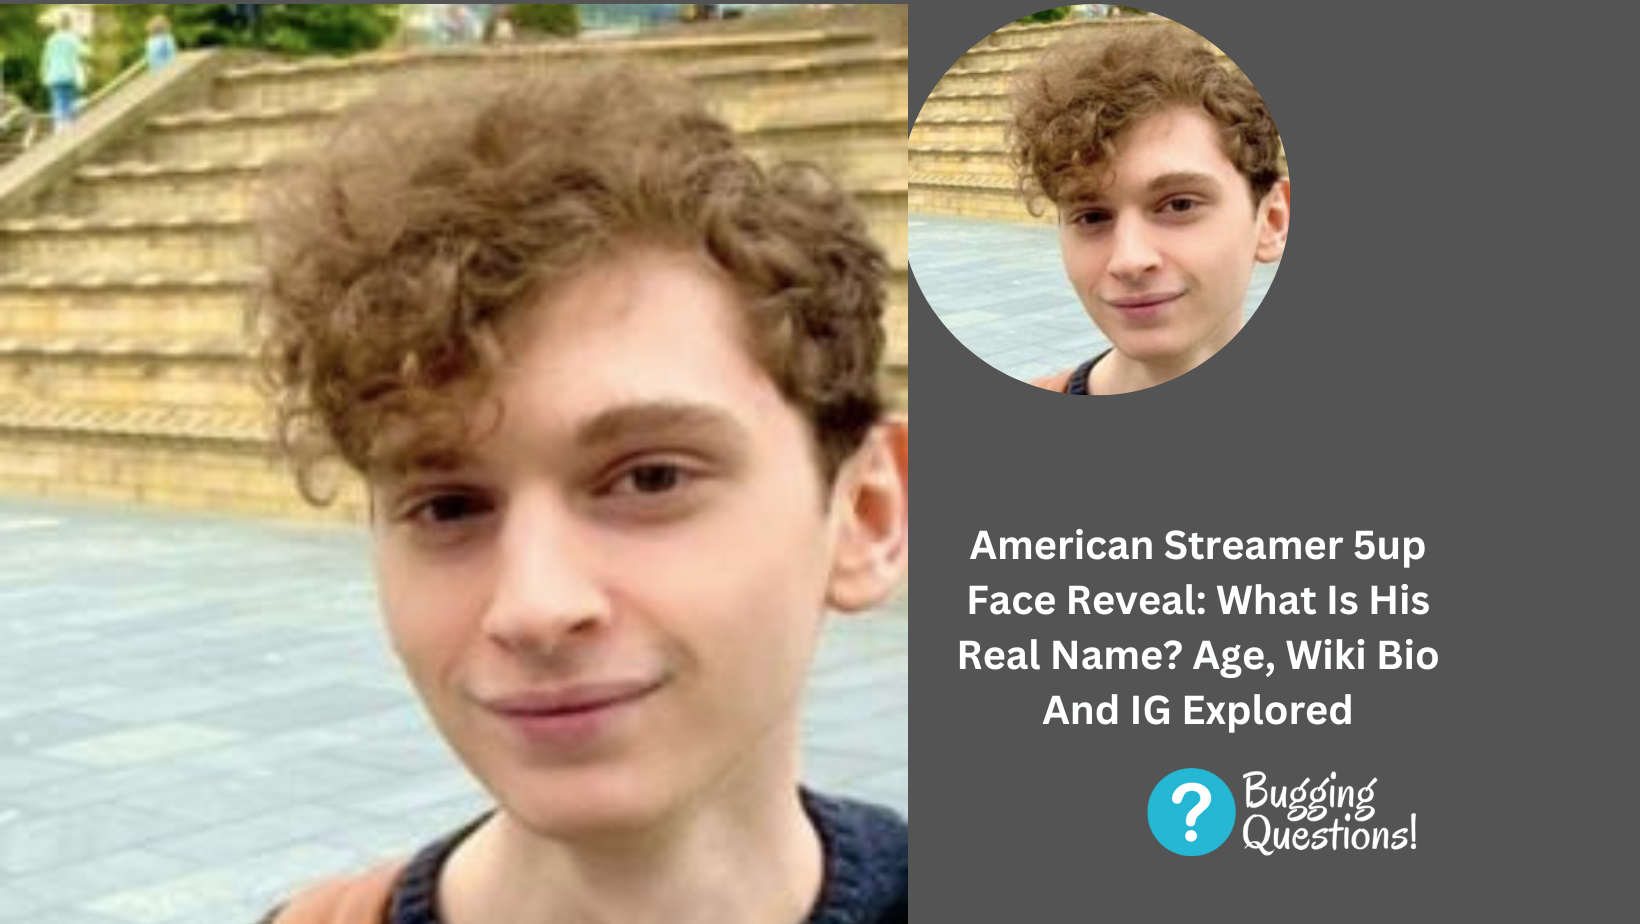 American Streamer 5up Face Reveal: What Is His Real Name? Age, Wiki Bio And IG Explored